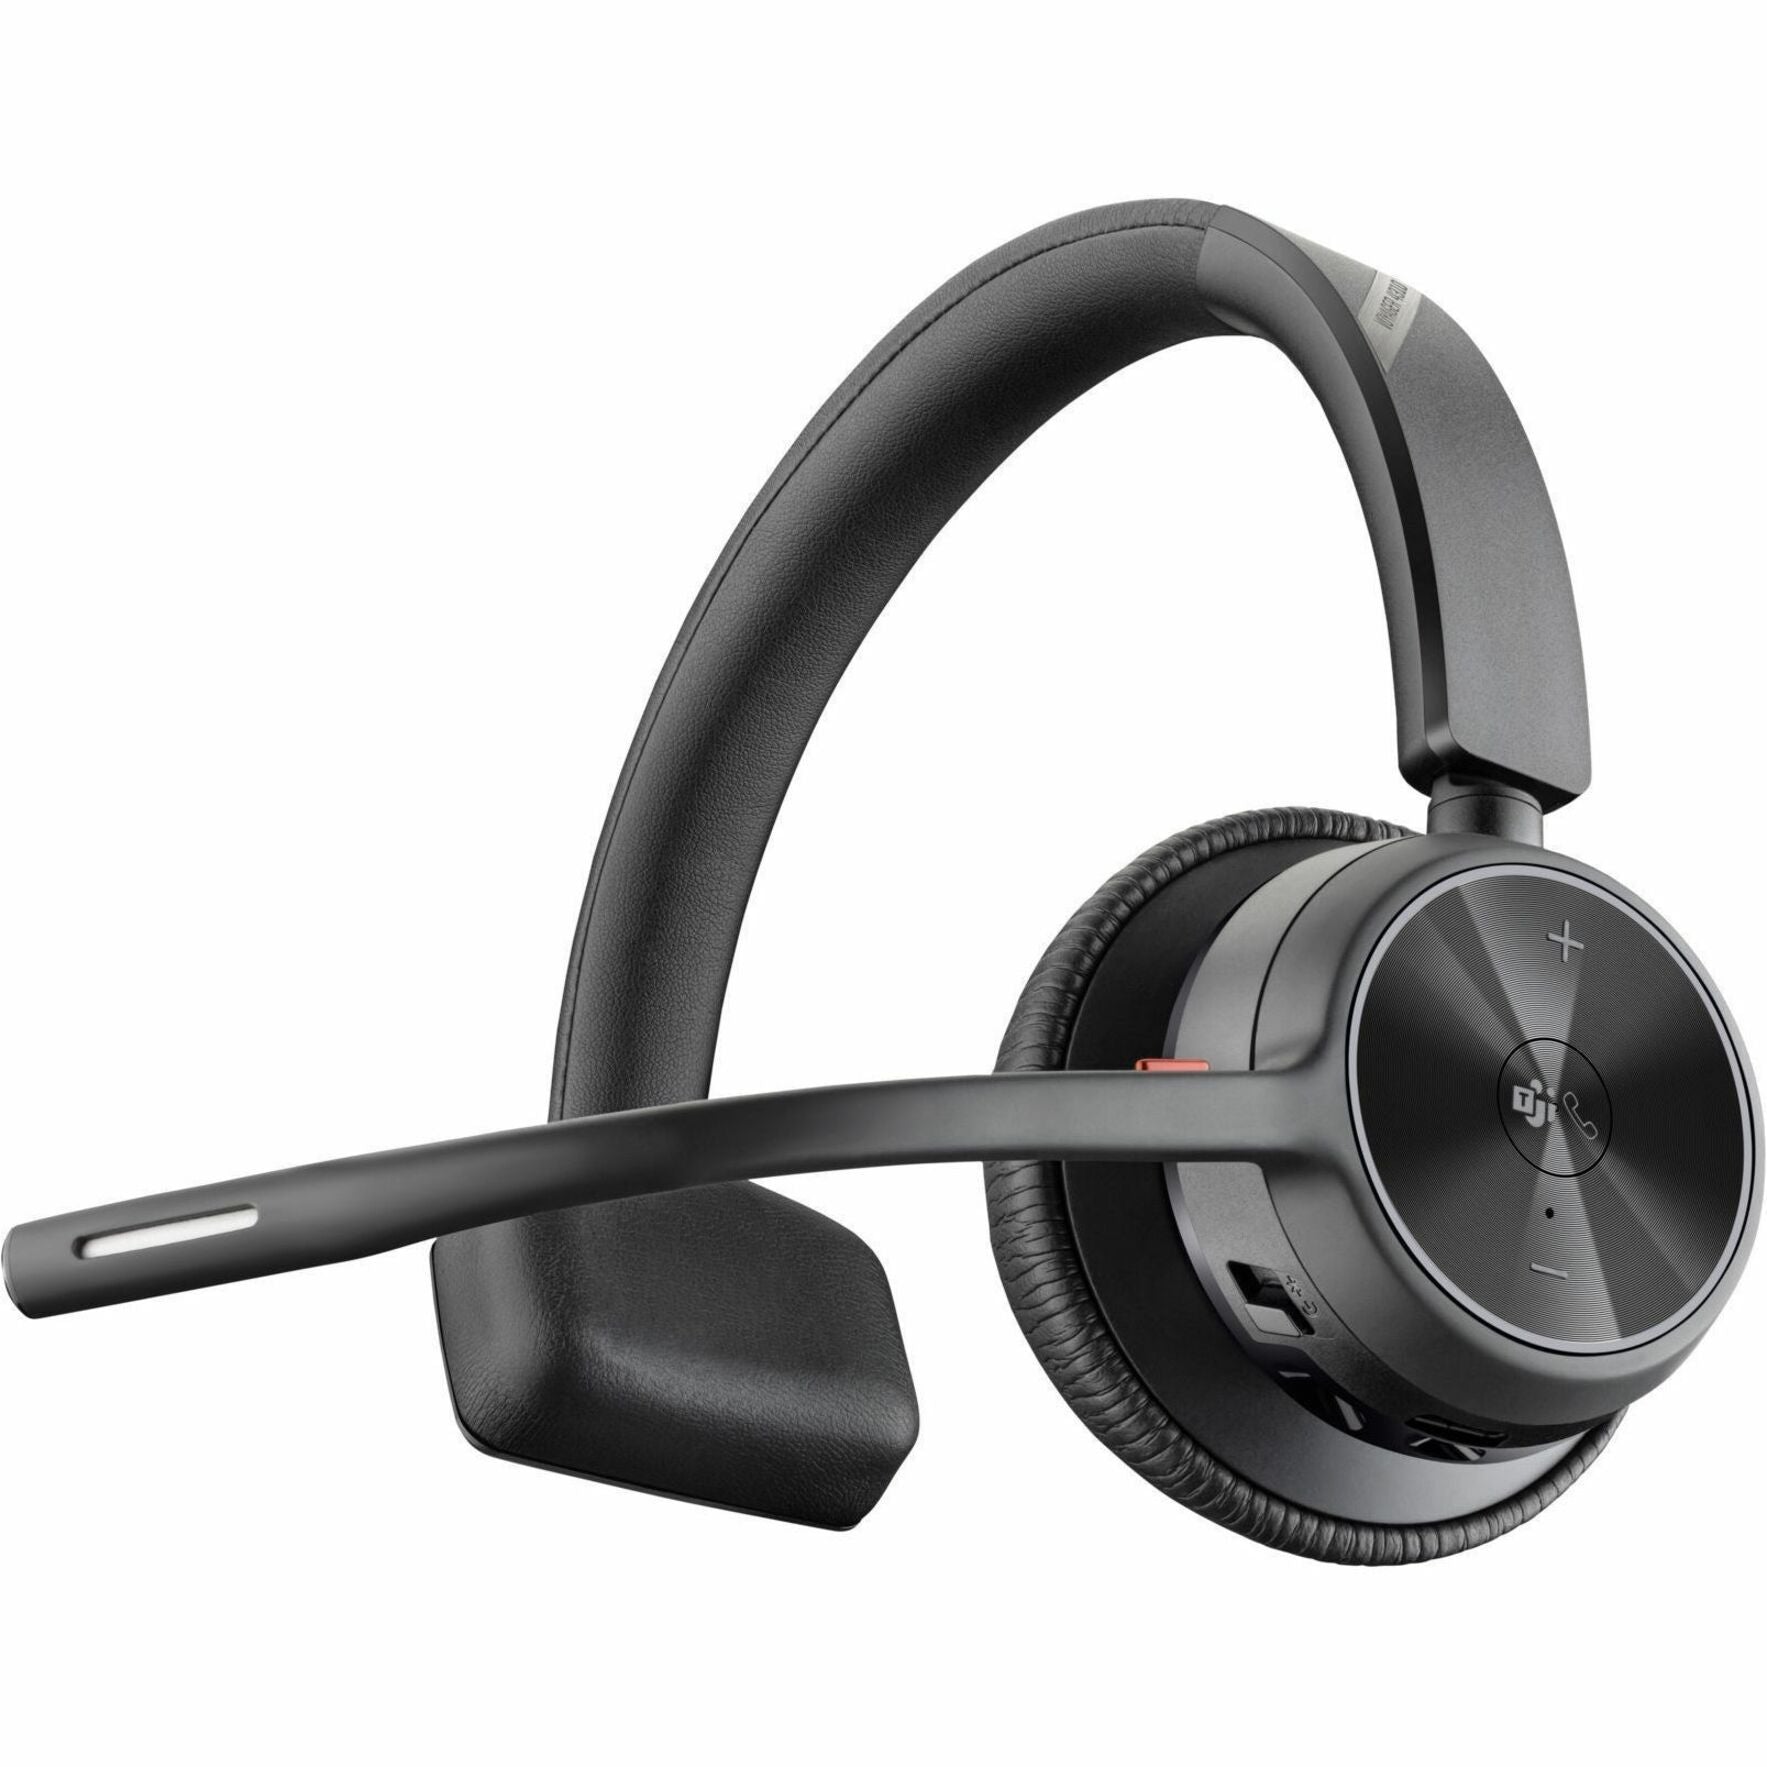 Poly 77Y95AA Voyager 4310 Microsoft Teams Certified USB-C Headset +BT700 dongle, On-ear Stereo Headset with Noise Canceling, 2 Year Warranty